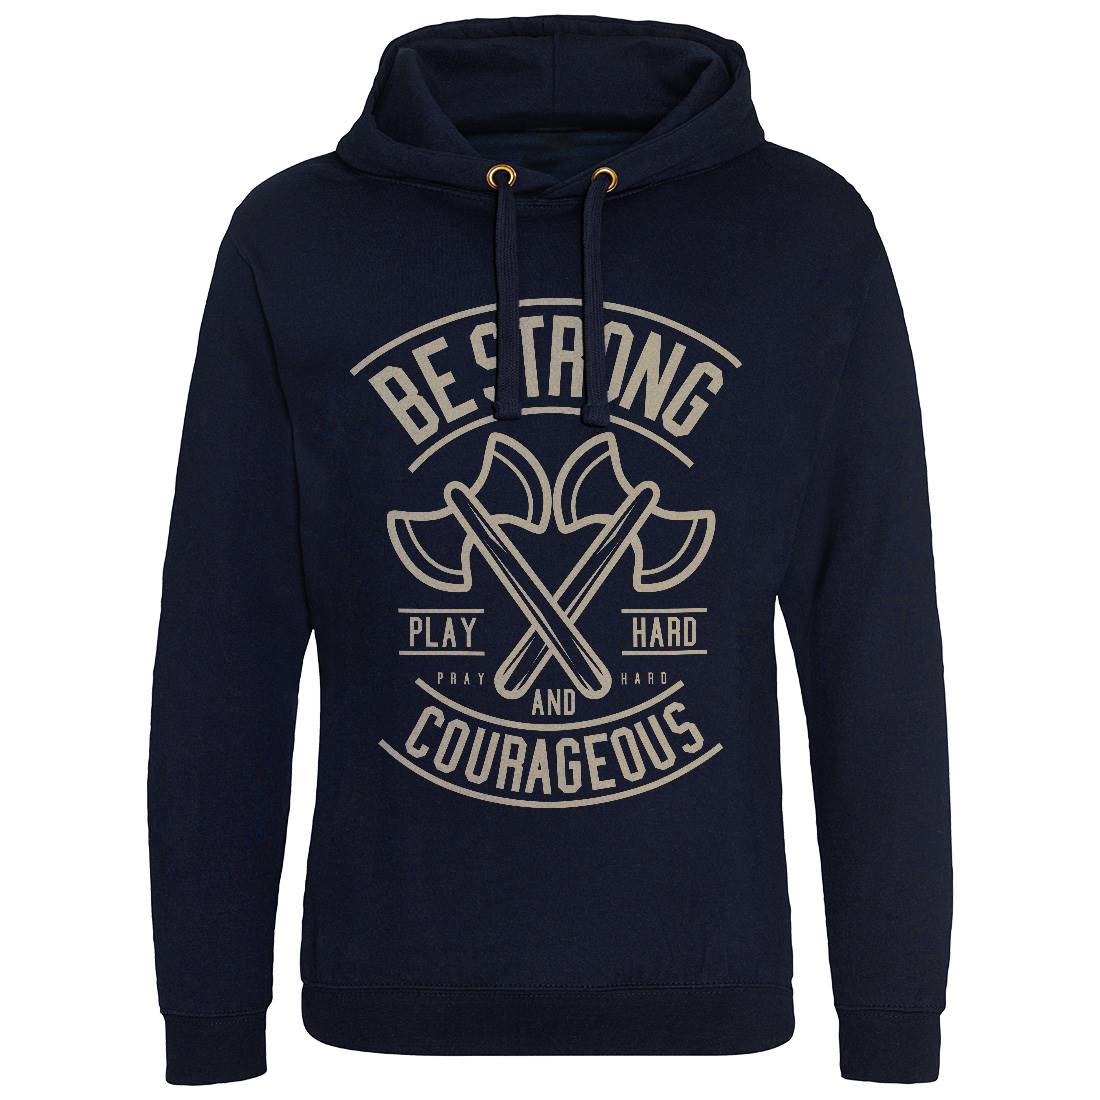 Be Strong Mens Hoodie Without Pocket Quotes A205